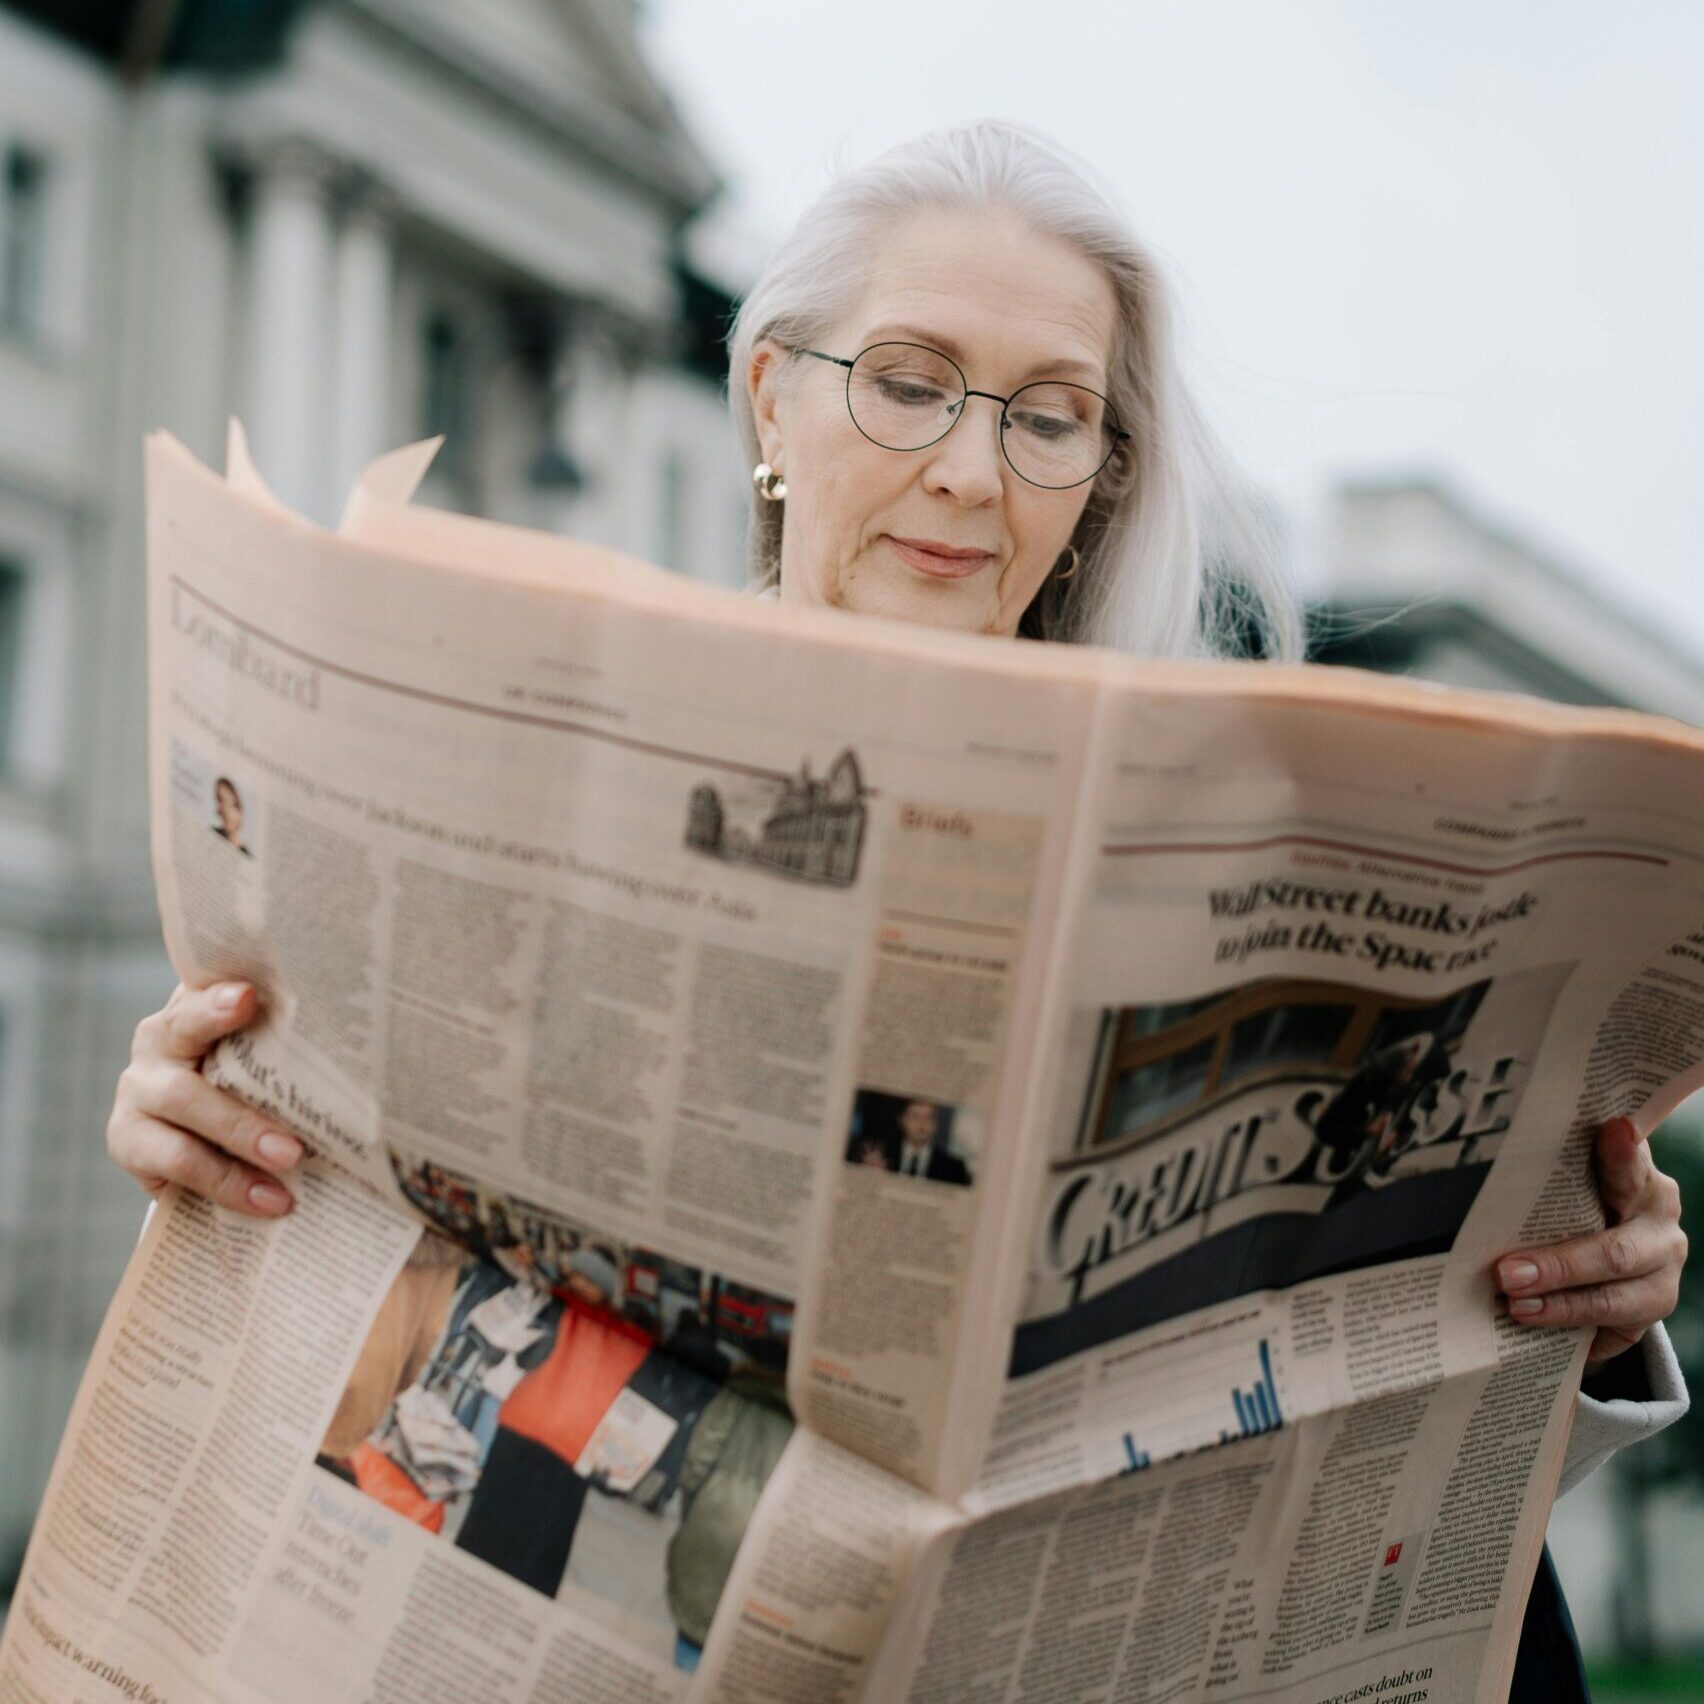 Woman with grey hair reading newspaper outside of building.